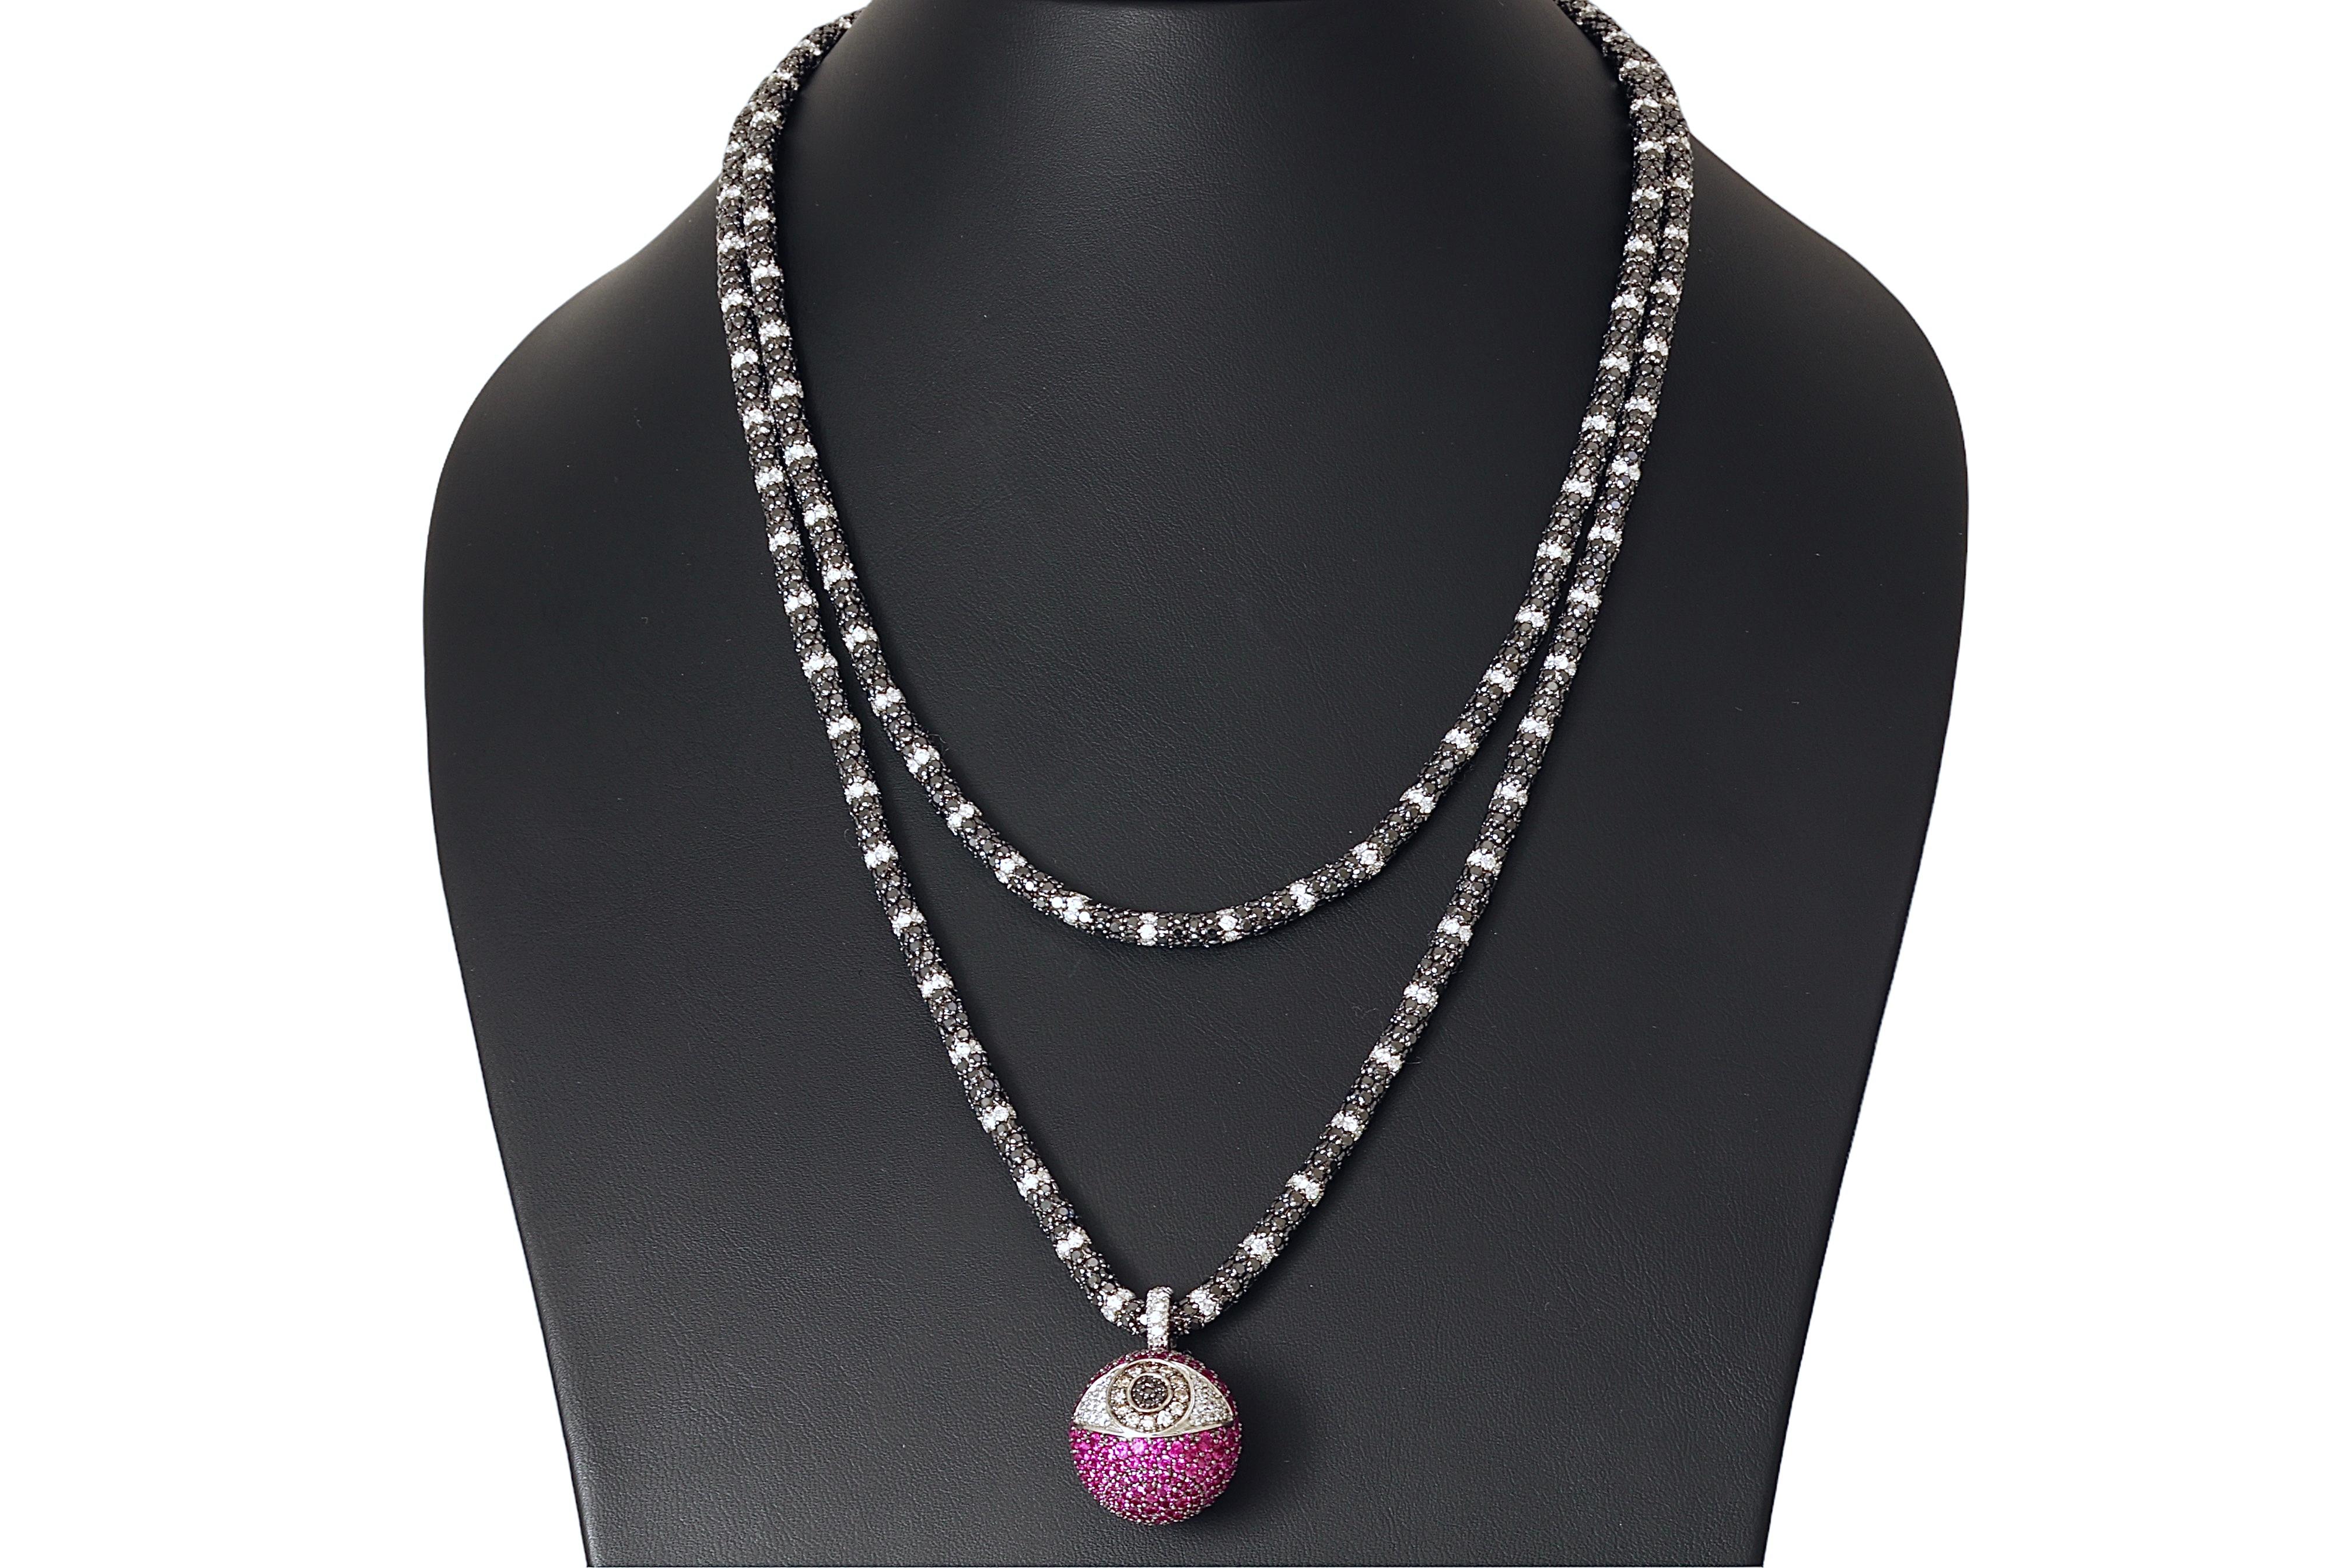 Artisan 18 Kt Gold Necklace & Pendant With 30 ct. Black & White Diamonds & Rubies For Sale